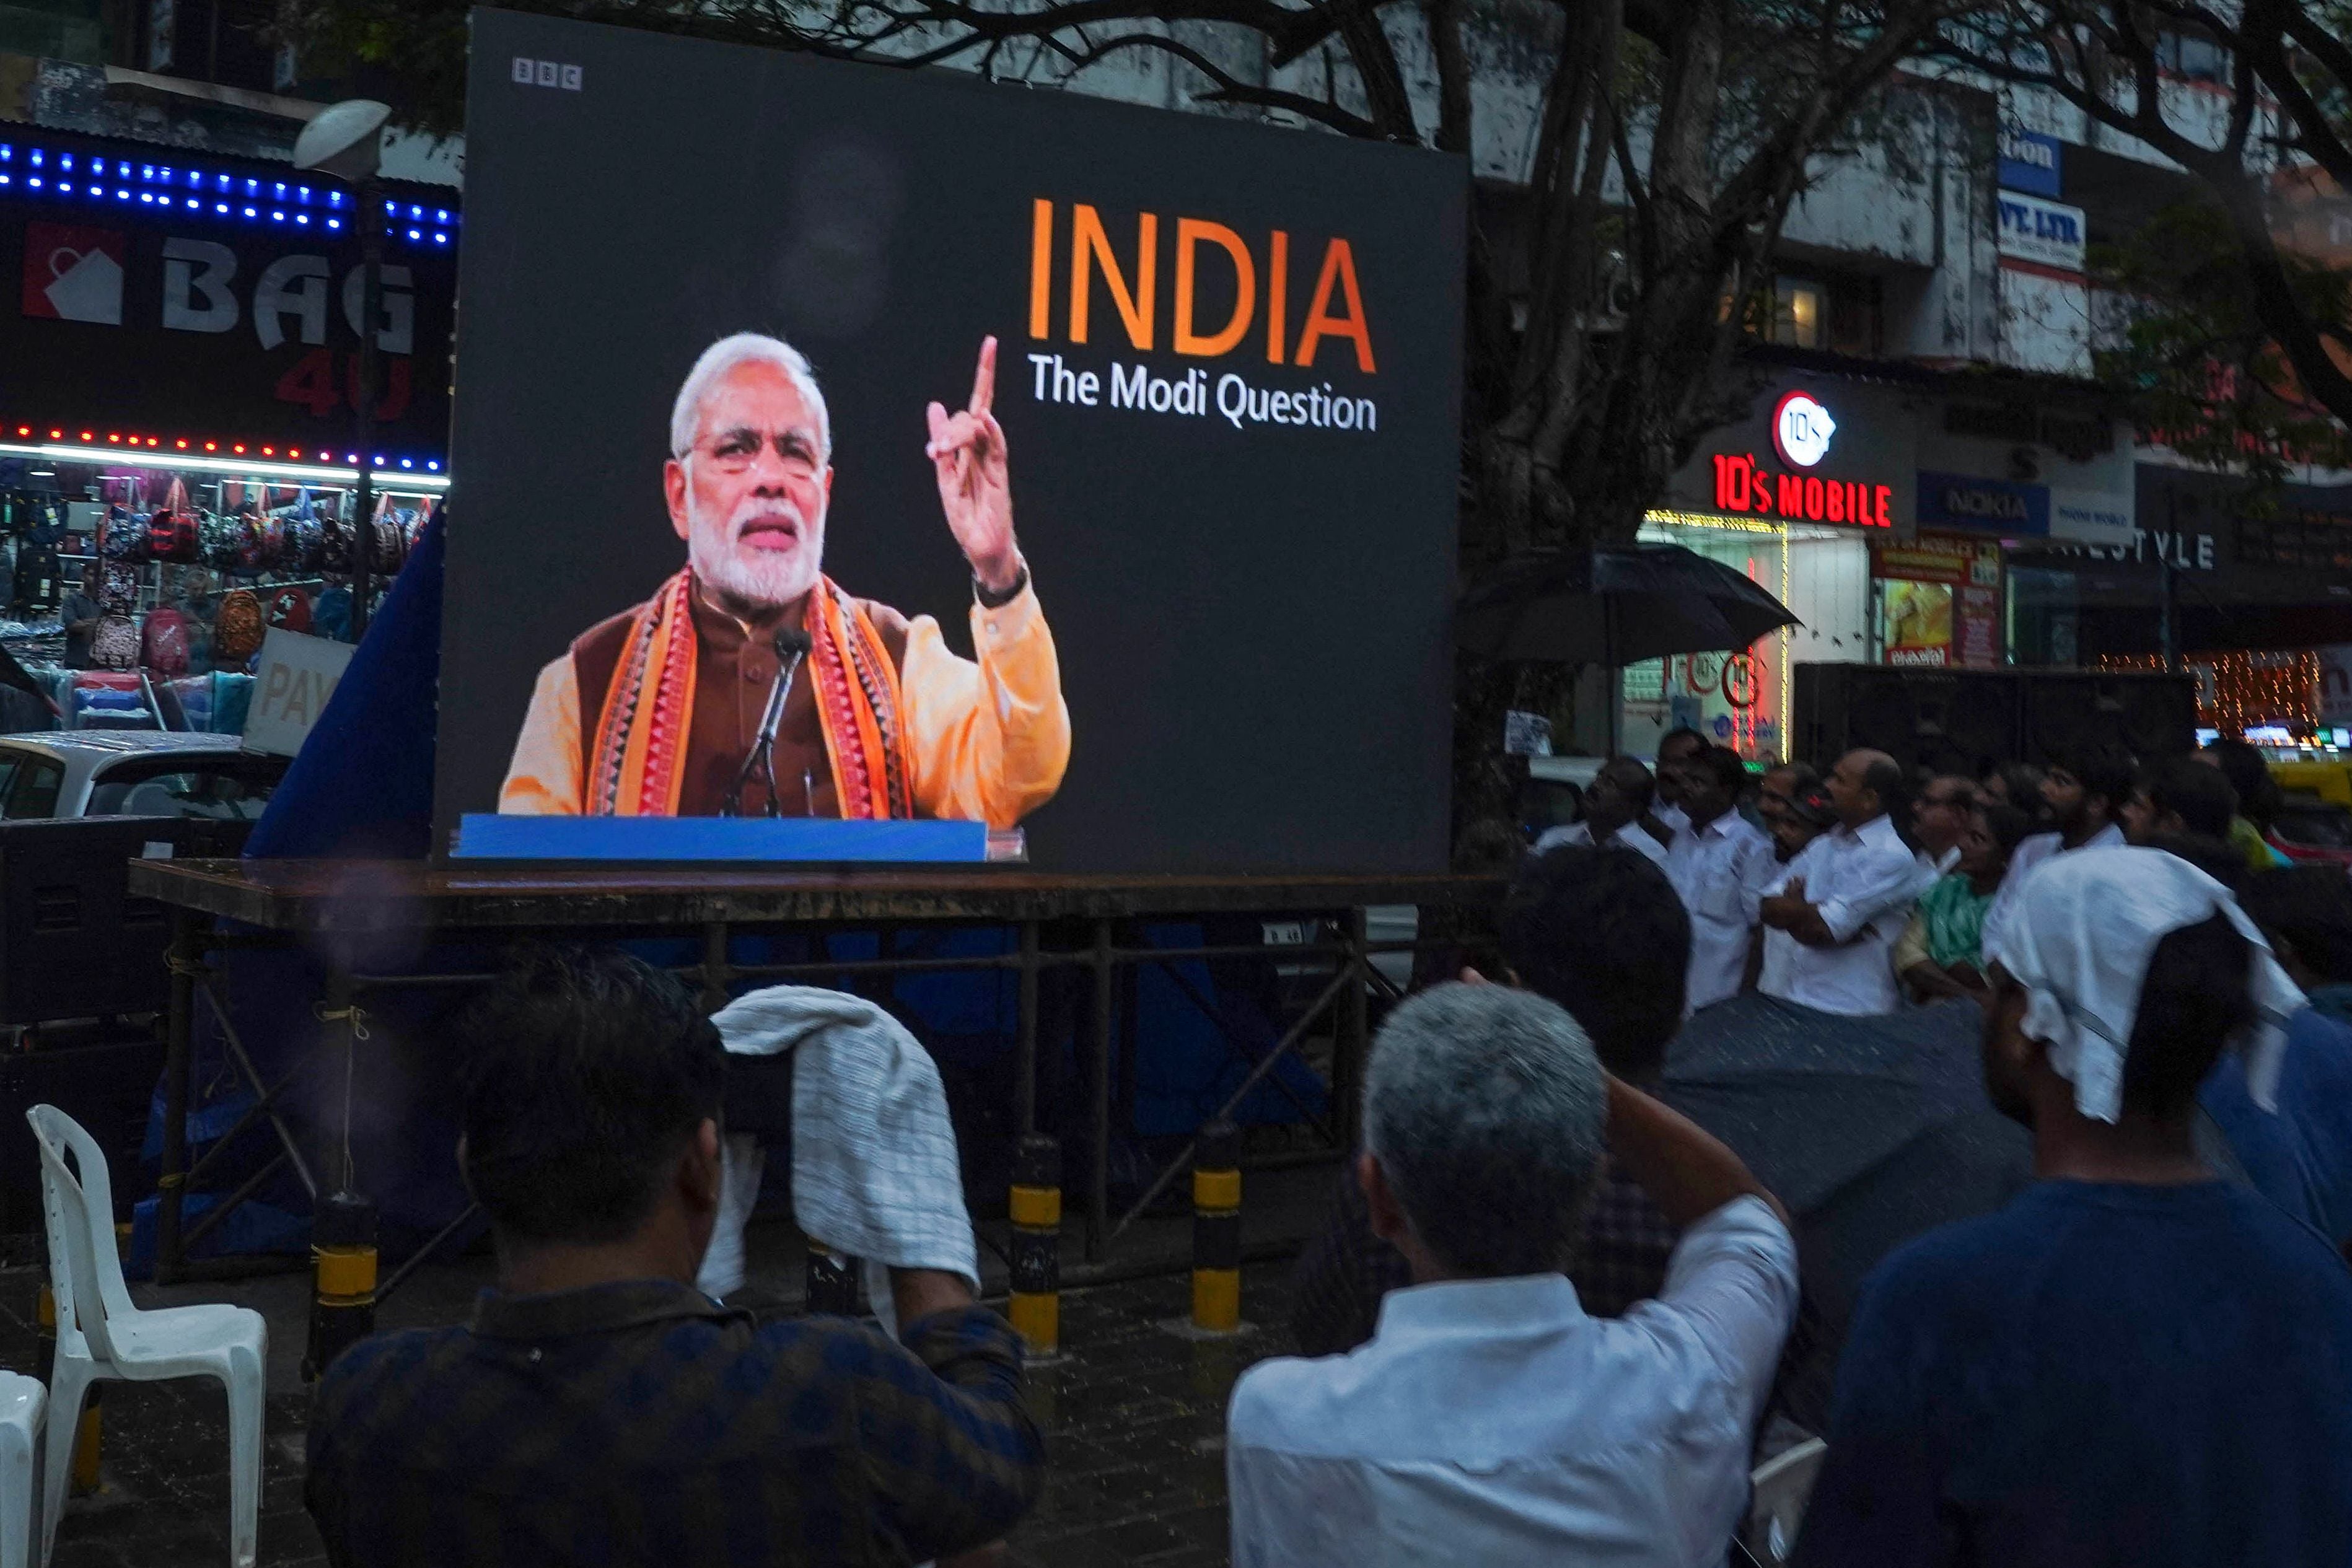 File. People watch the BBC documentary ‘India: The Modi Question', on a screen installed at the Marine Drive junction under the direction of the district Congress committee, in Kochi on 24 January 2023